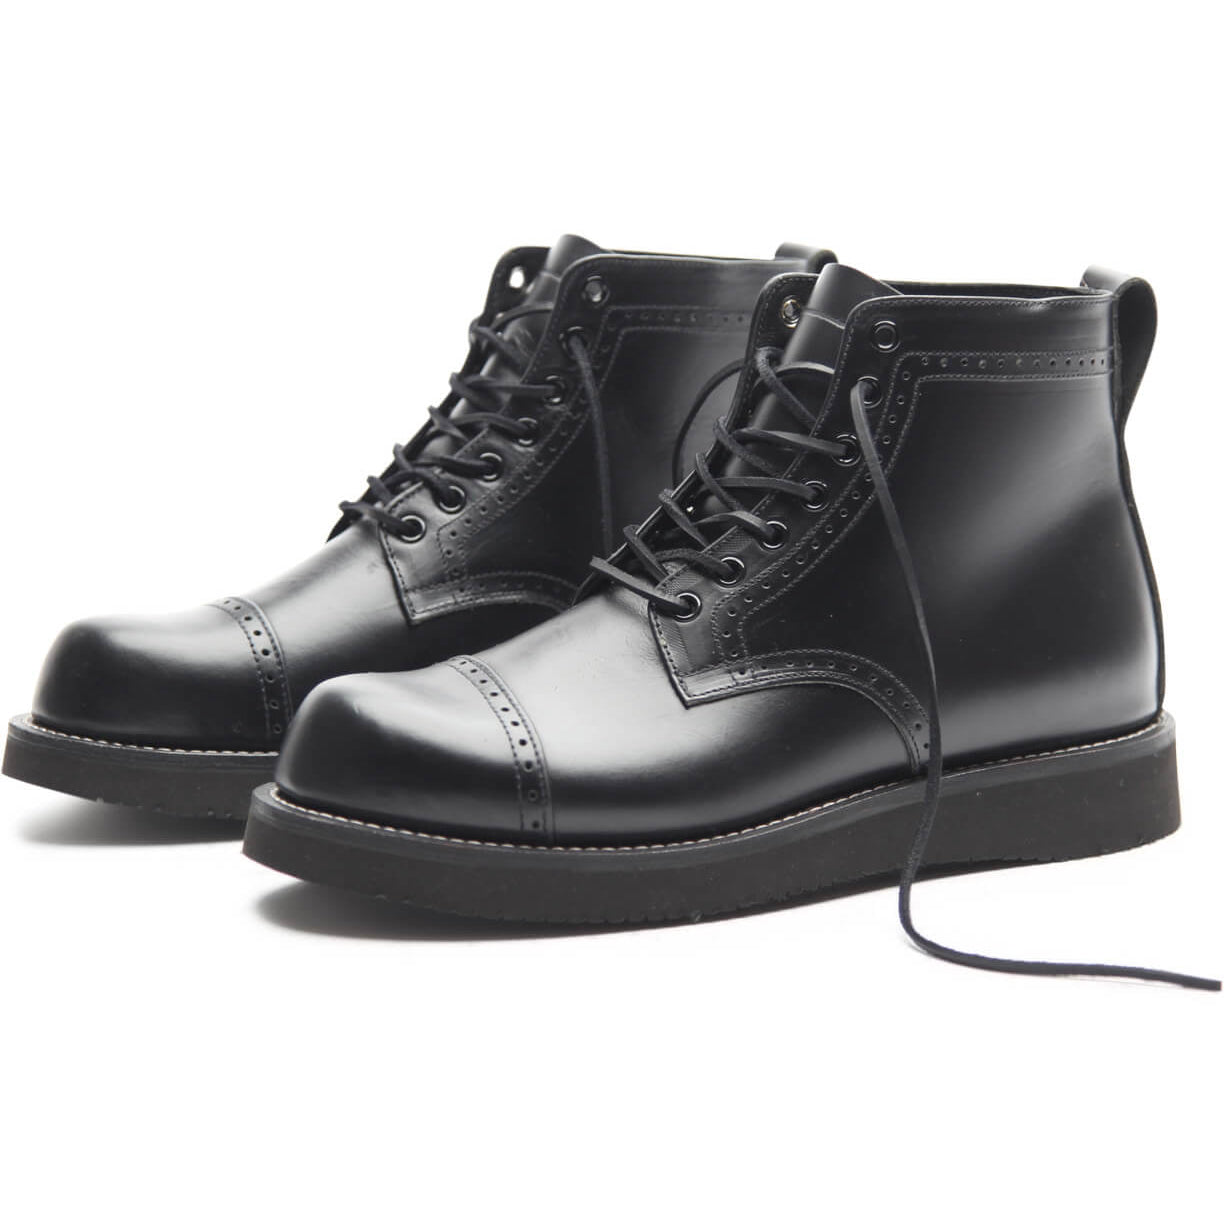 The Broken Homme Aaron Boot, a sleek and stylish addition to the Broken Homme collection, showcases a cap toe silhouette. These black boots stand out on a crisp white background.